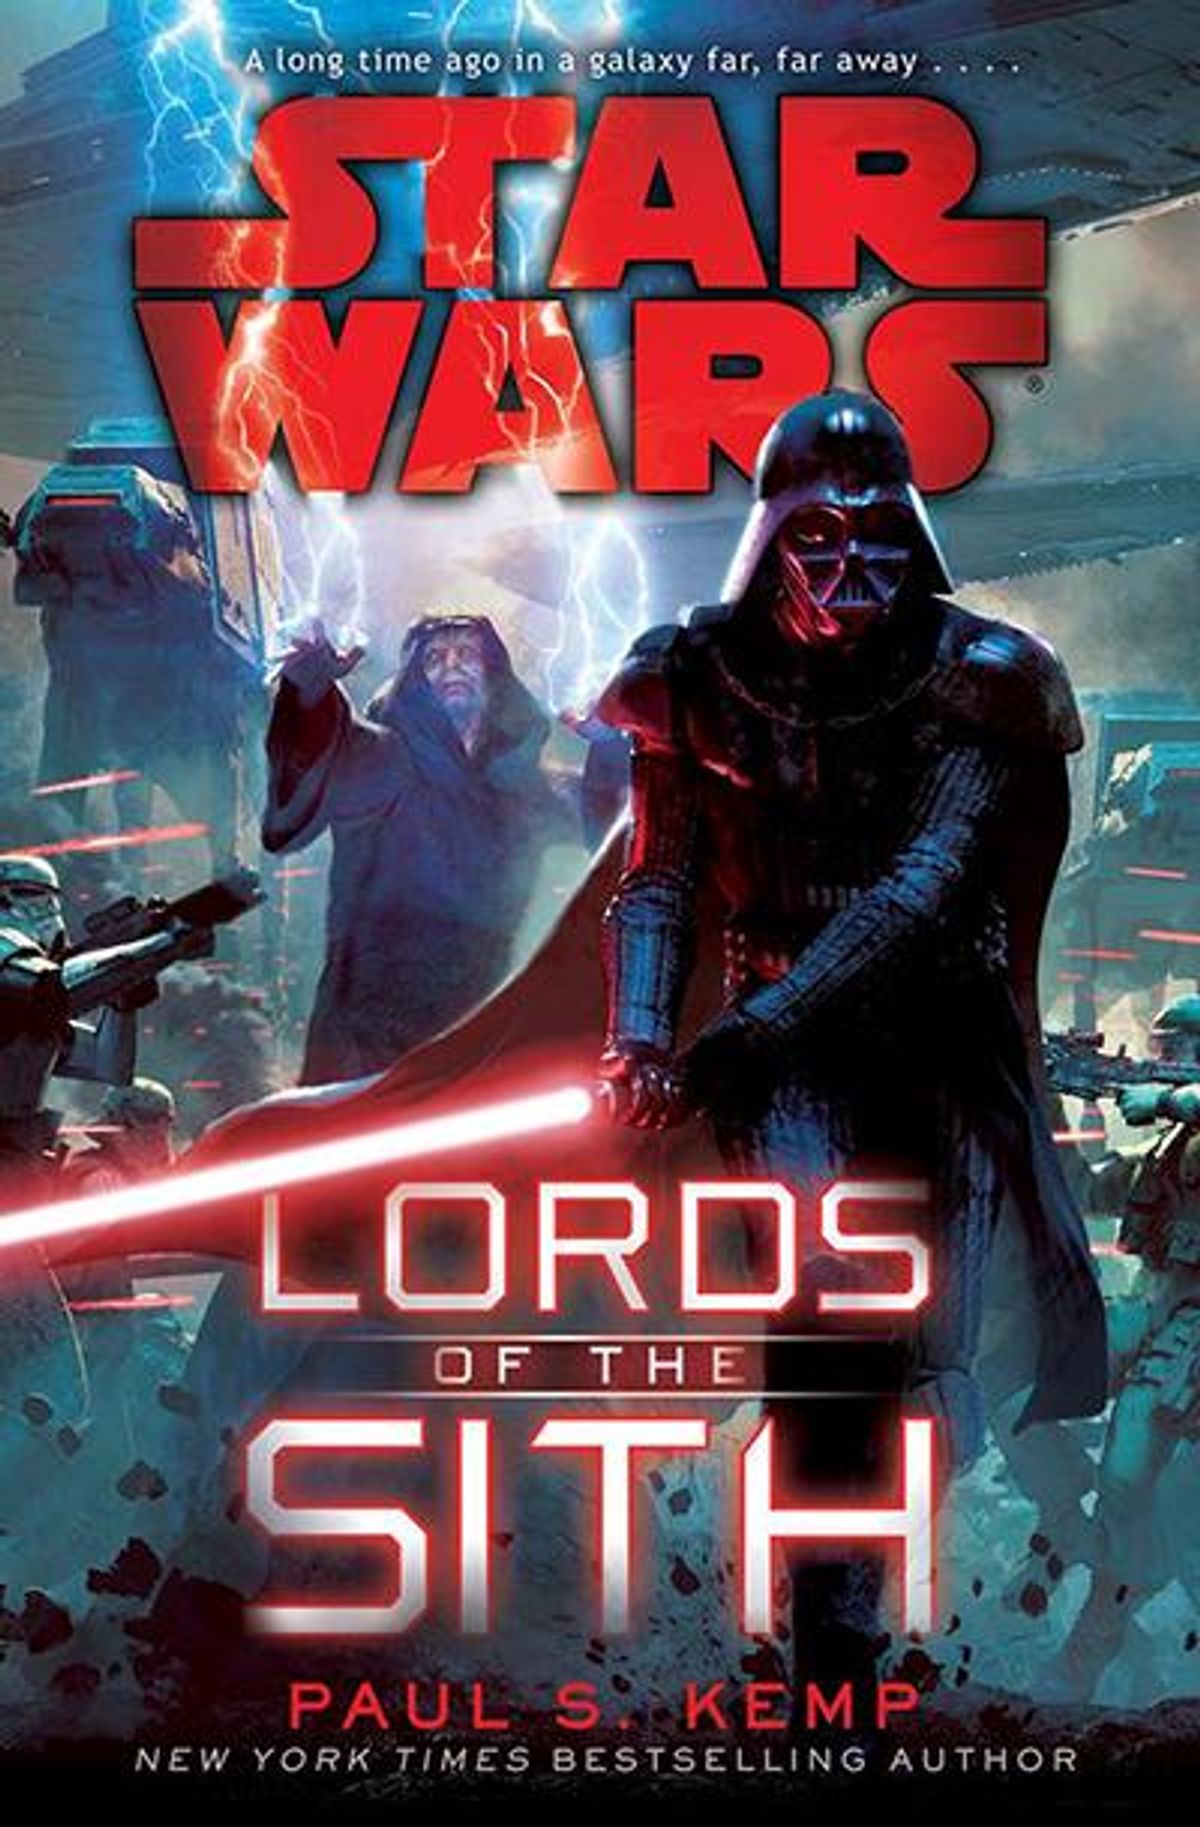 Lords_of_the_sith-x400d